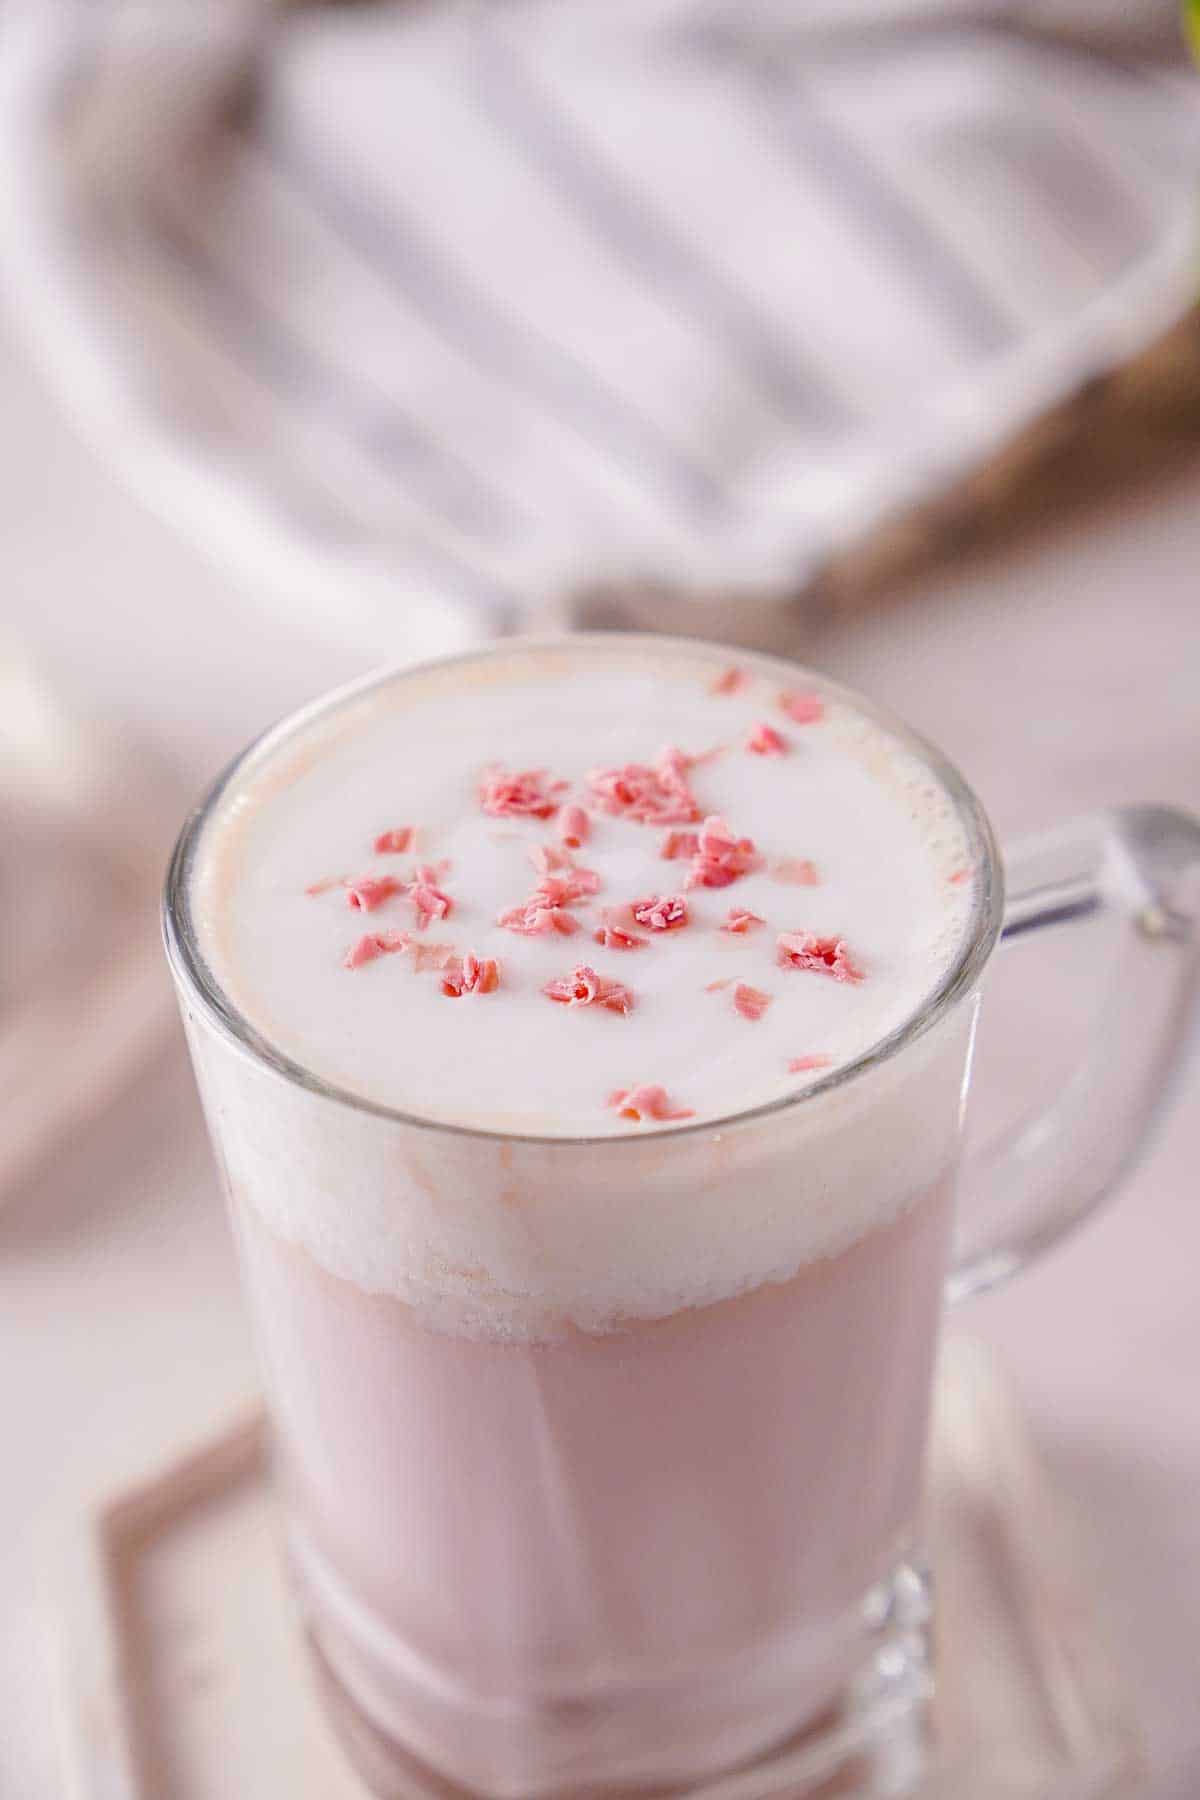 A clear mug of hot chocolate with a pink color. The hot chocolate is garnished with ruby chocolate shavings.